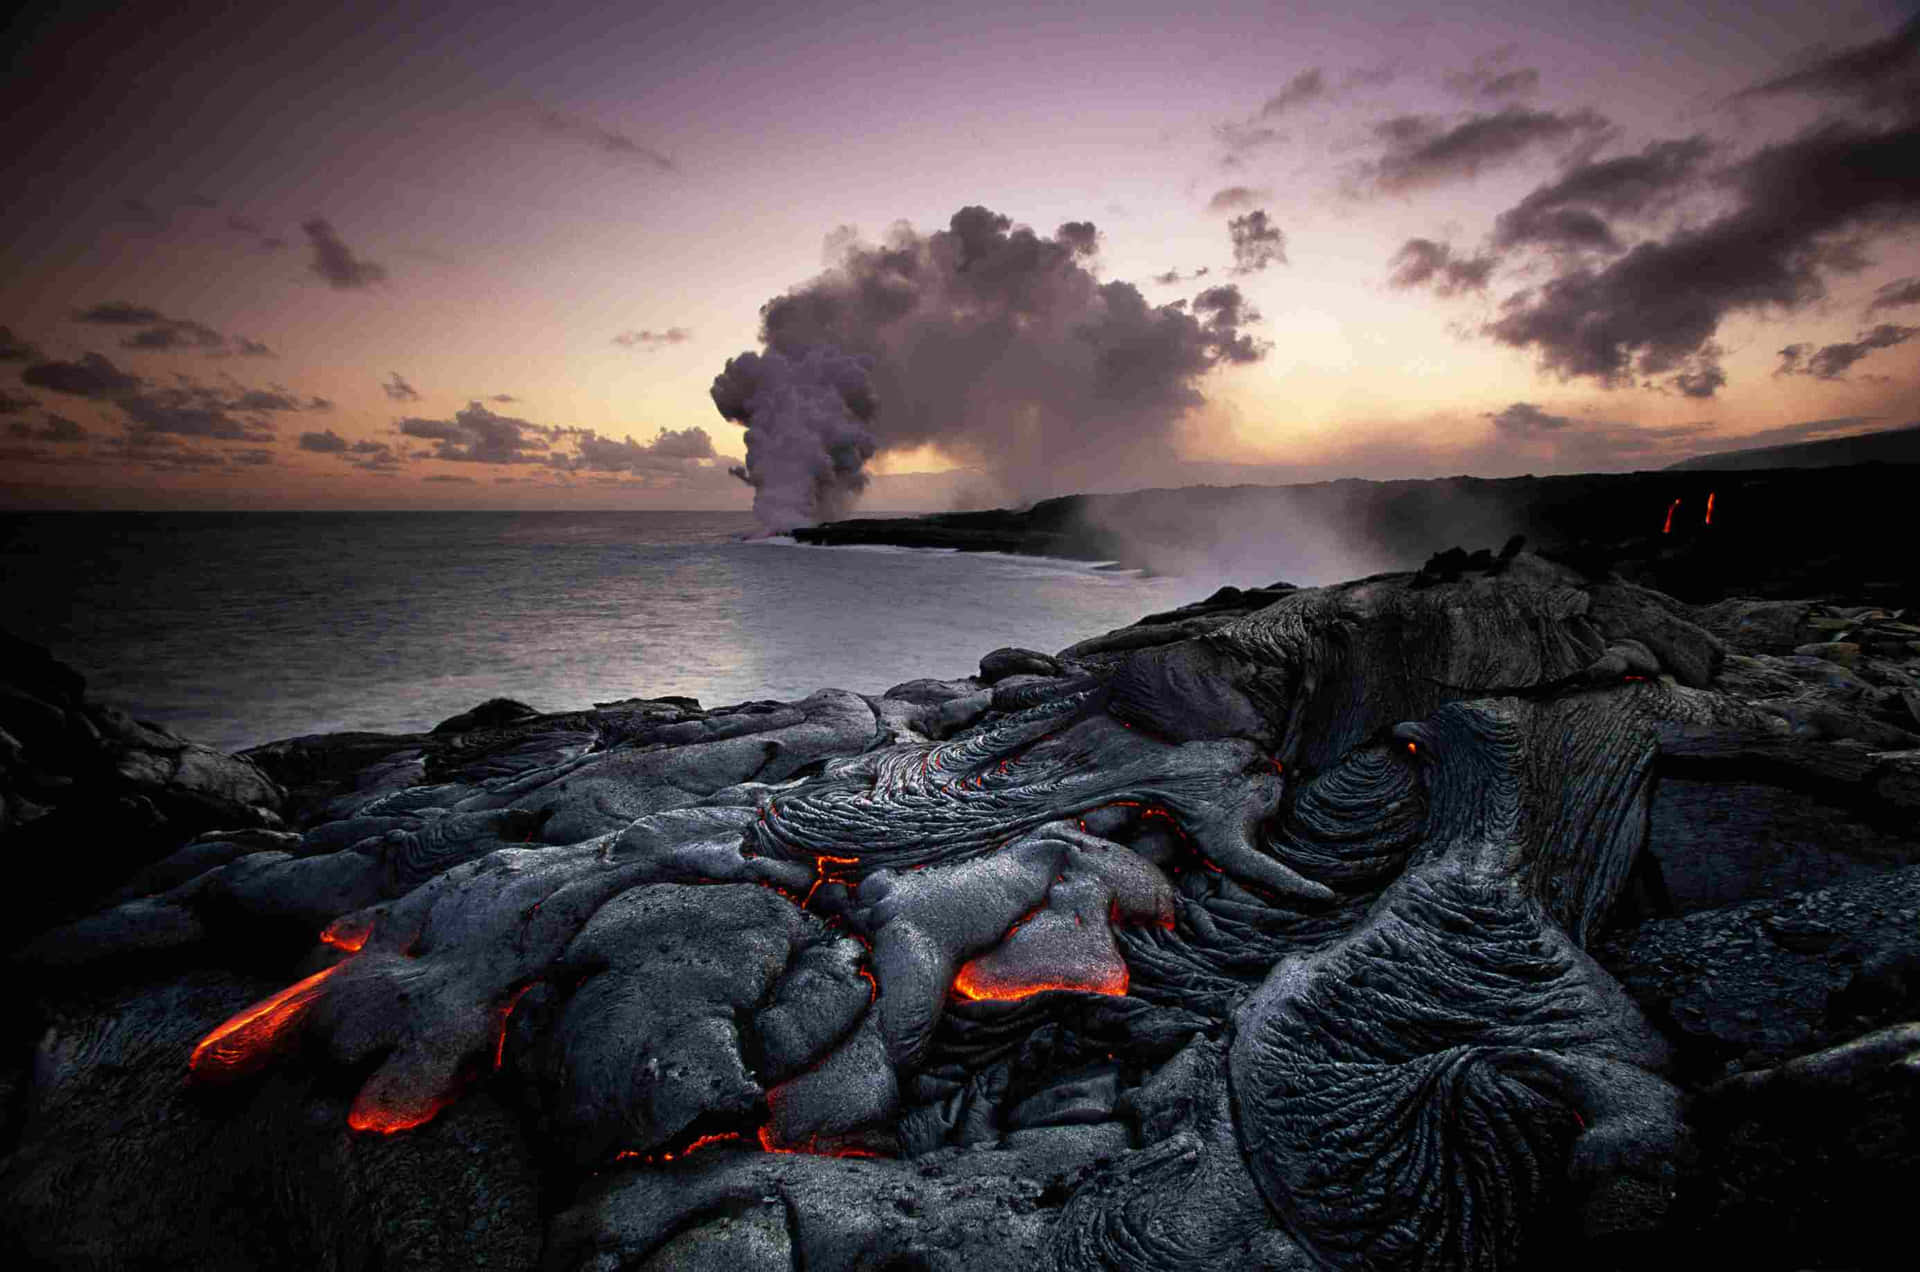 Lava Flows On The Ocean At Sunset